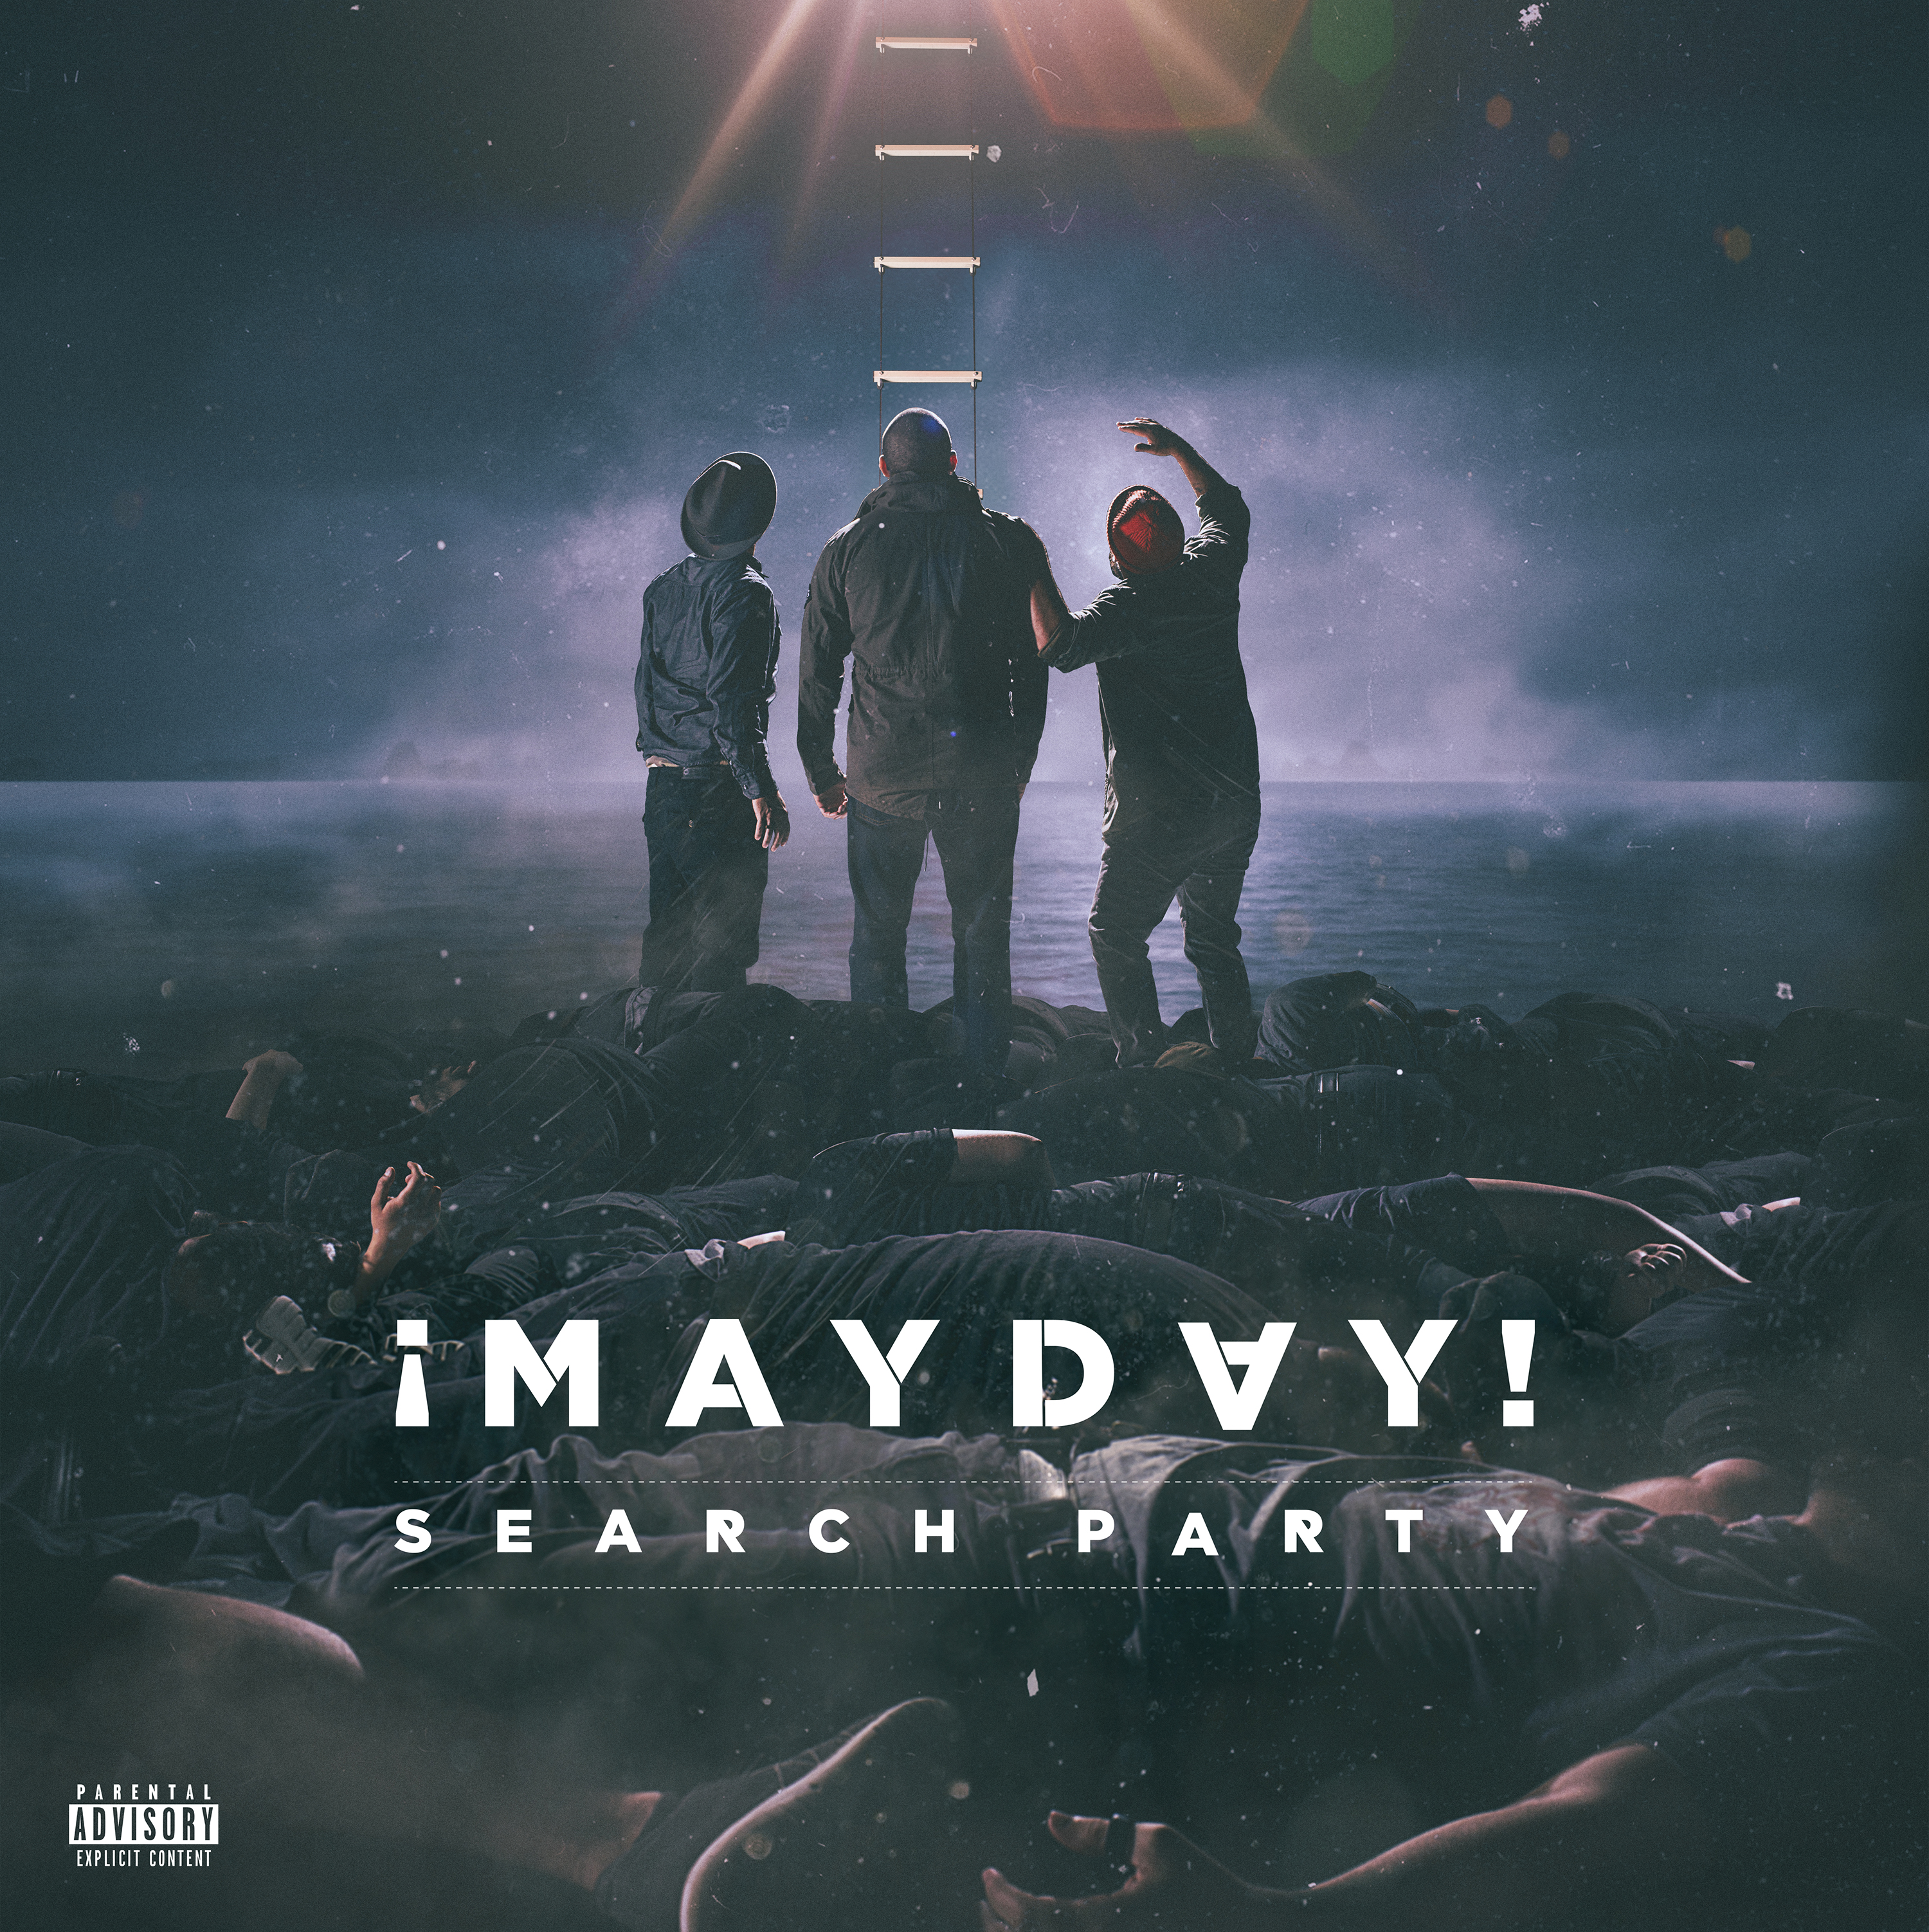 MAYDAY_SP_COVER_FINAL